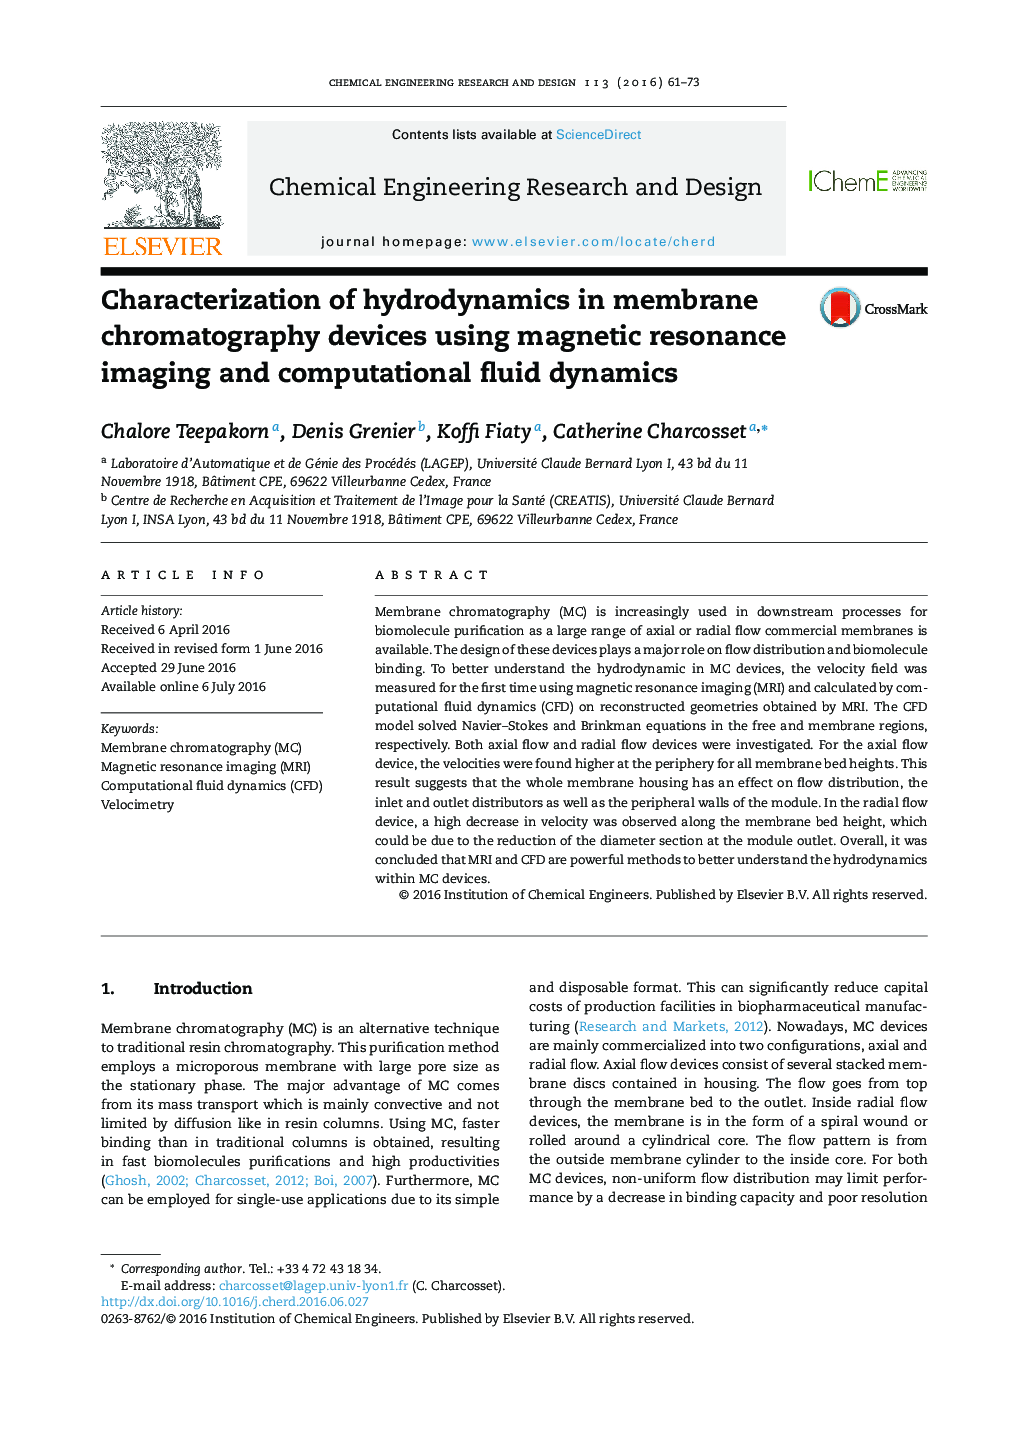 Characterization of hydrodynamics in membrane chromatography devices using magnetic resonance imaging and computational fluid dynamics